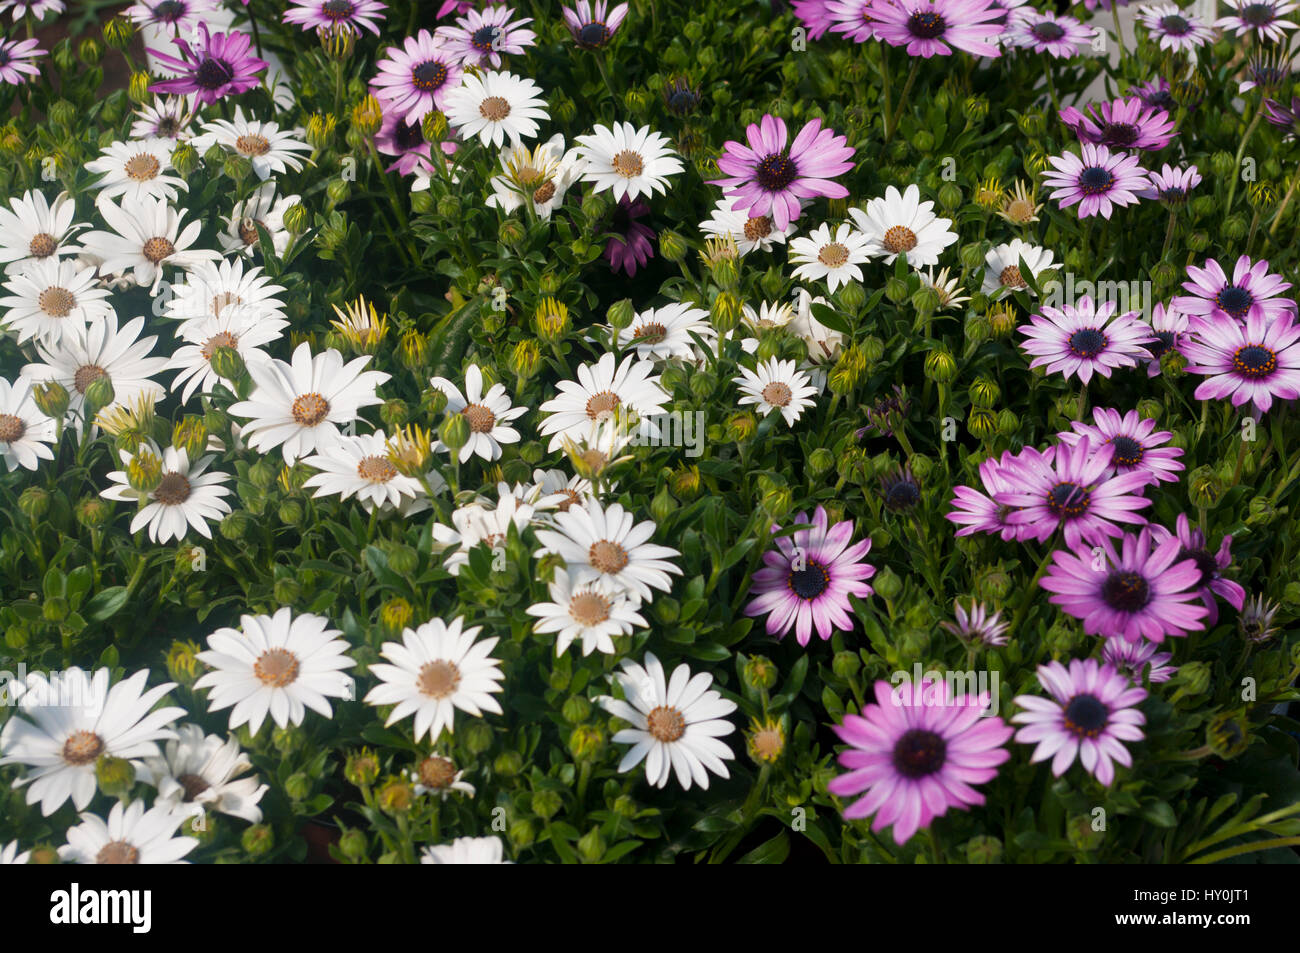 Violet and White osteospermum flowers Brightly Coloured Osteospermums aslo known as African Daisies Stock Photo